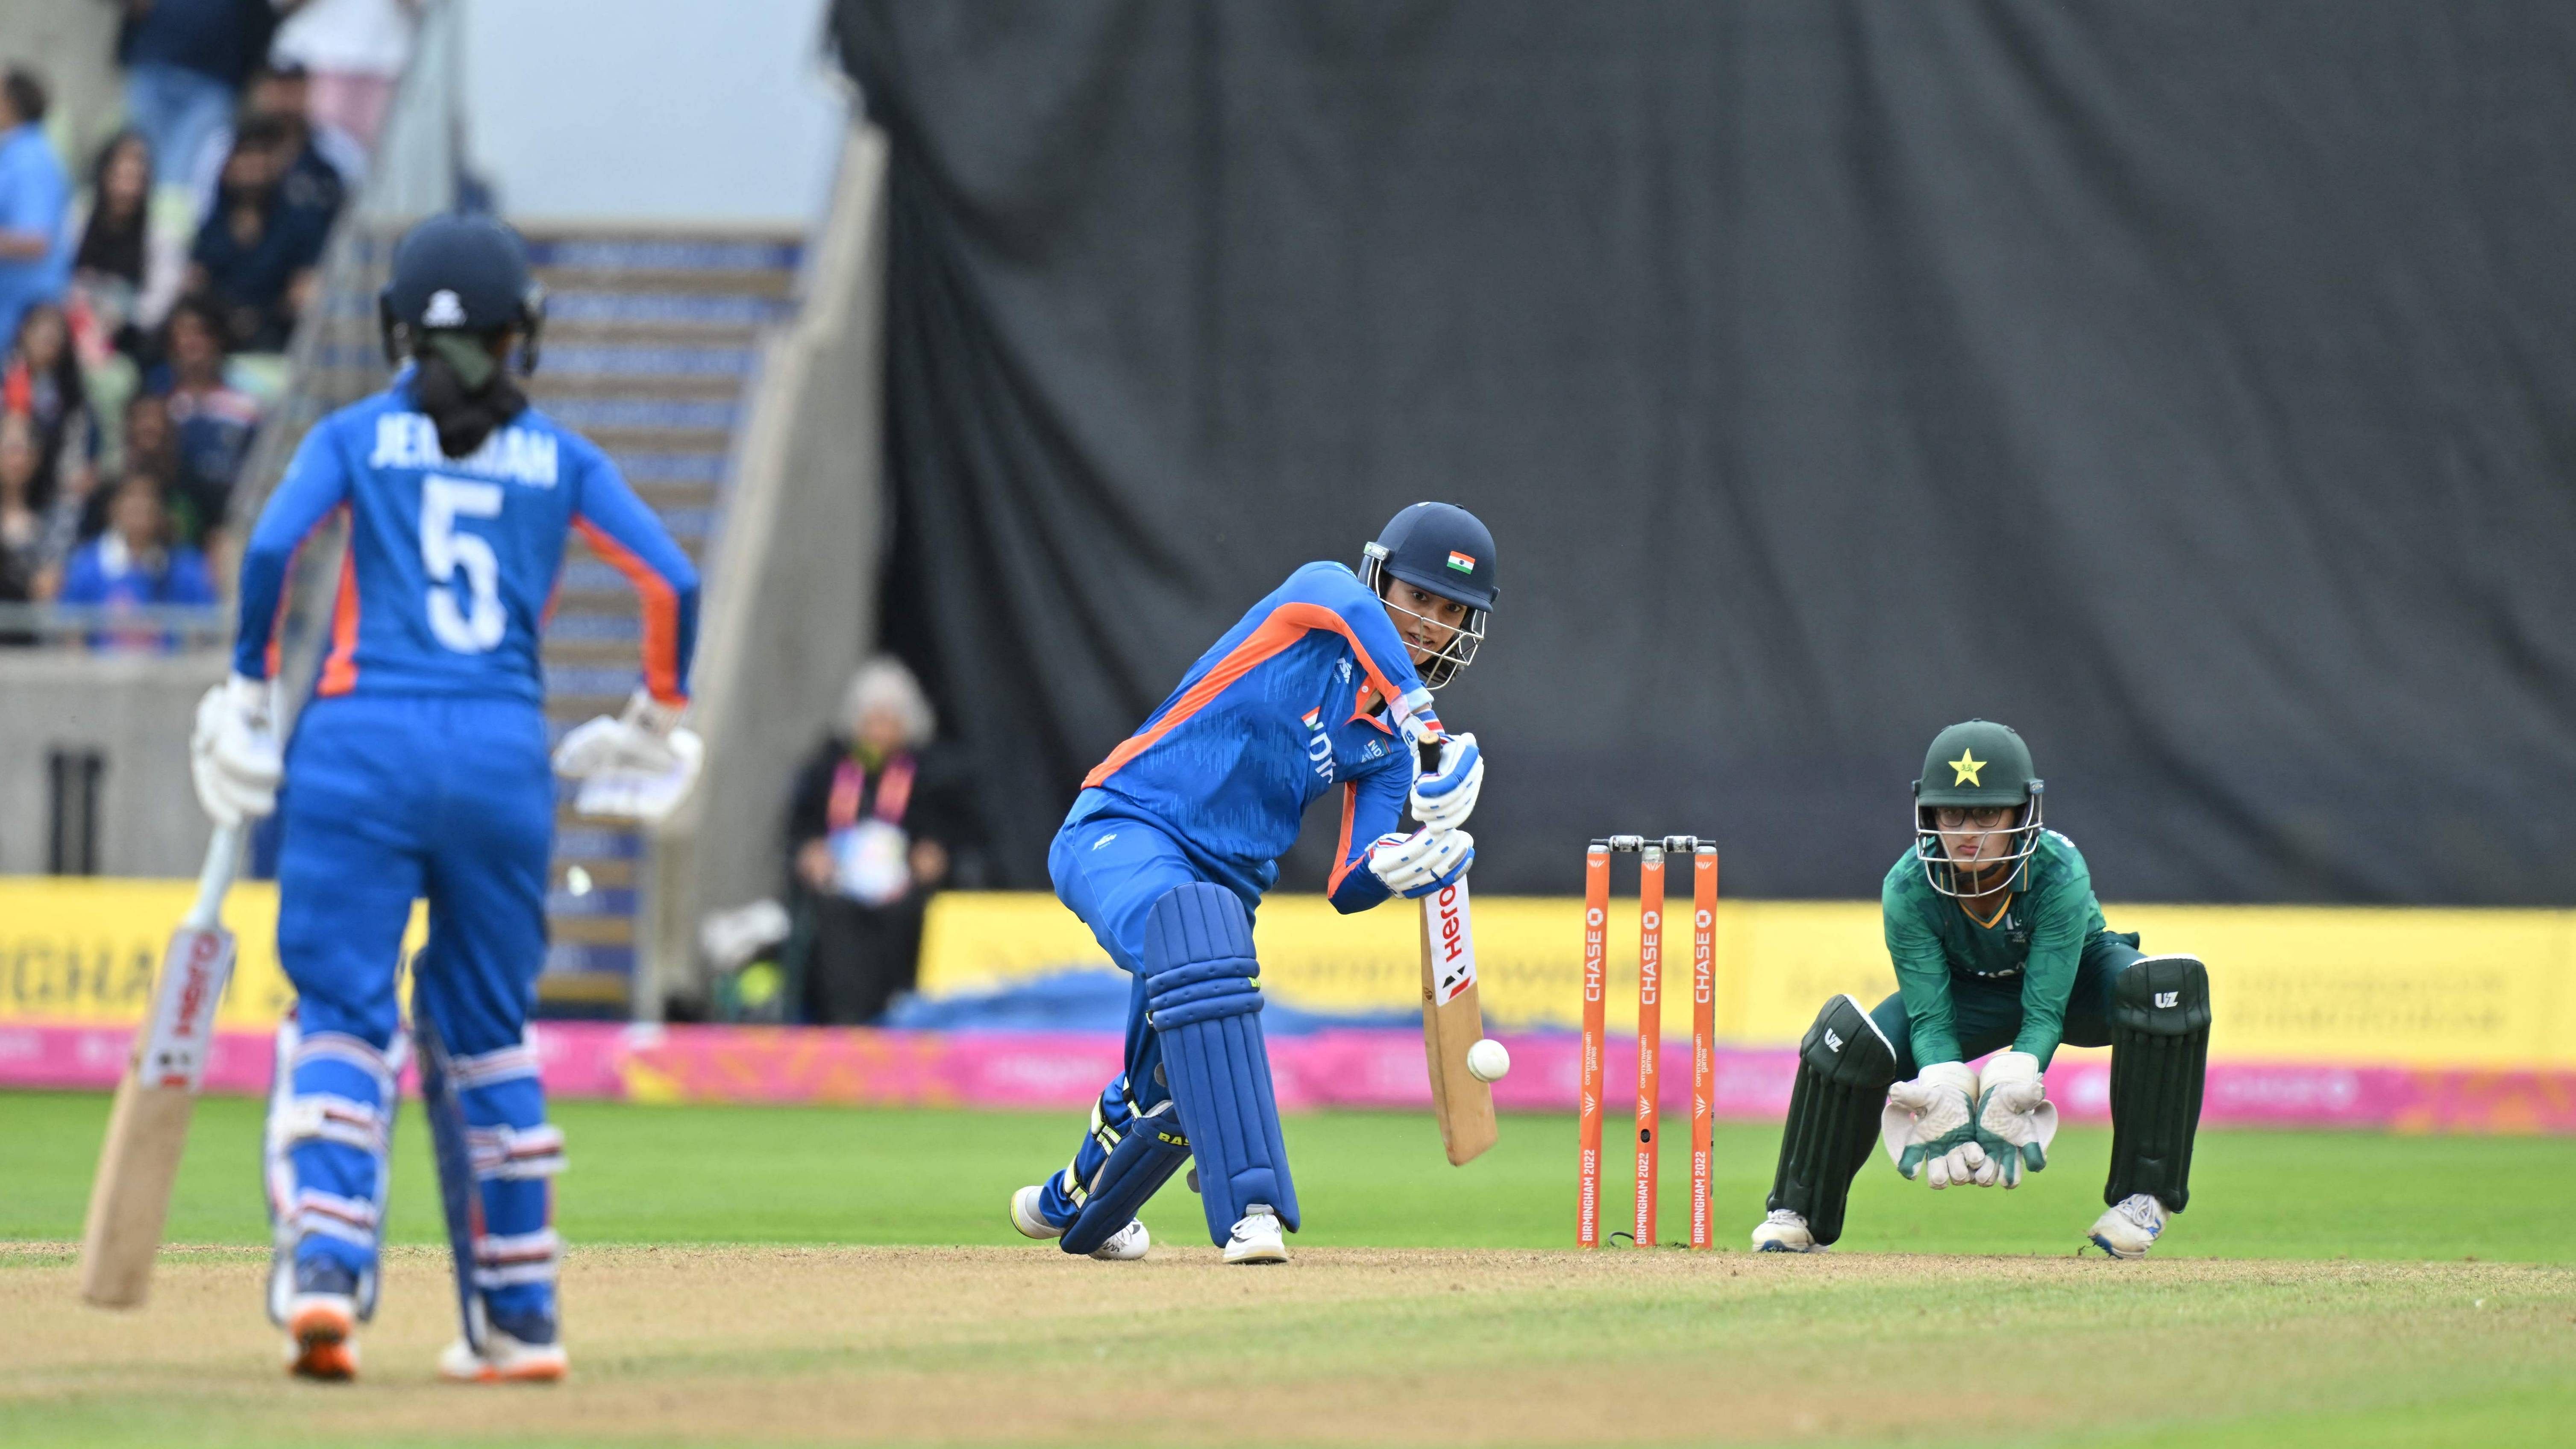 India's Mandhana (L) bats during the T20 cricket match at the CWG. Credit: AFP Photo